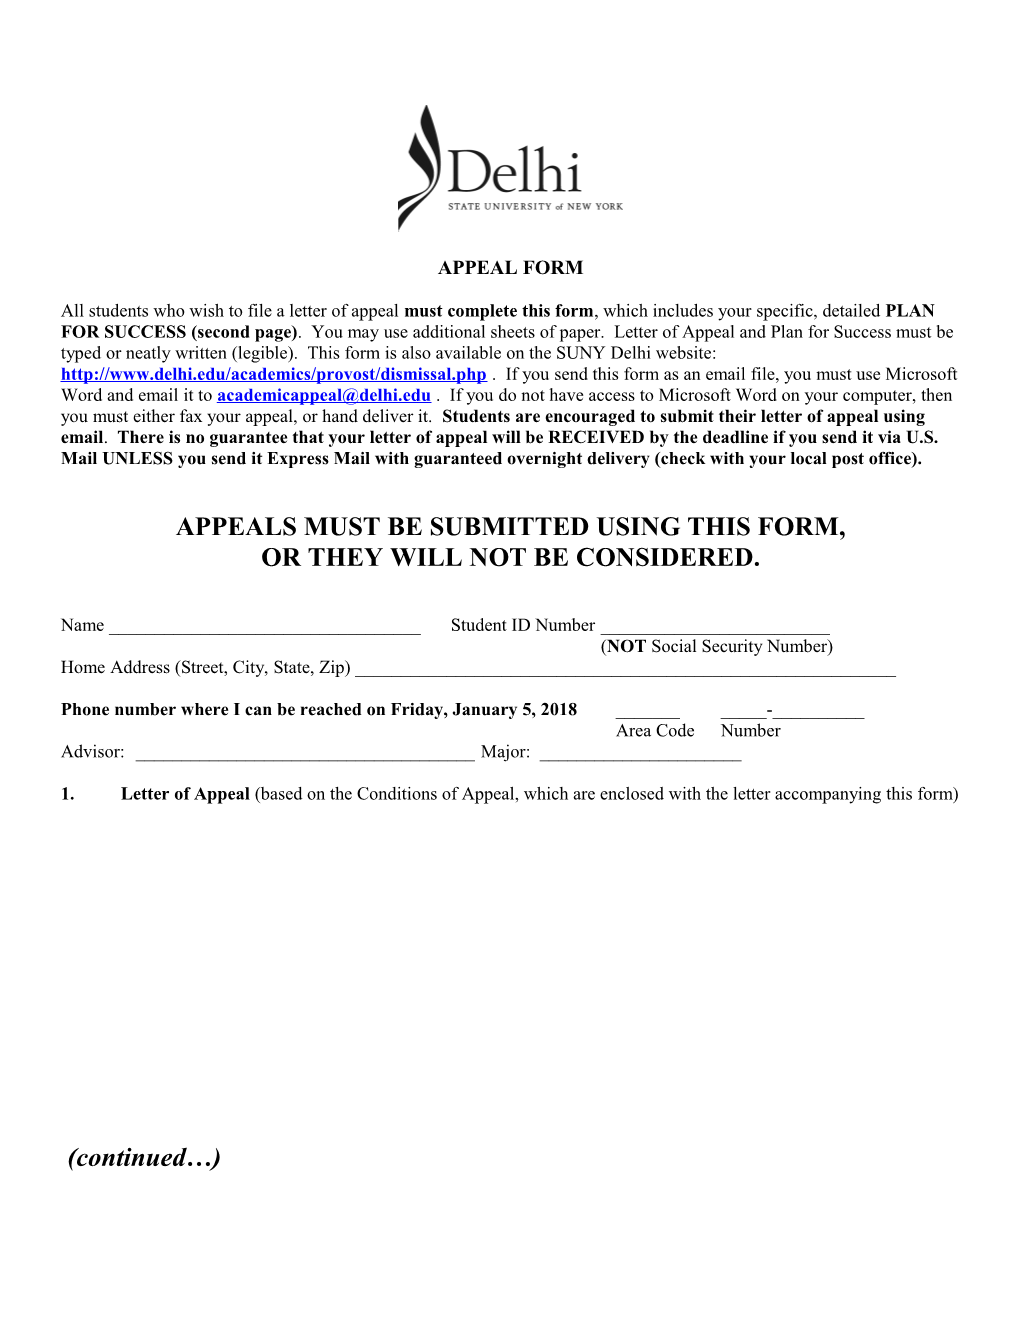 Appeals Must Be Submitted Using This Form